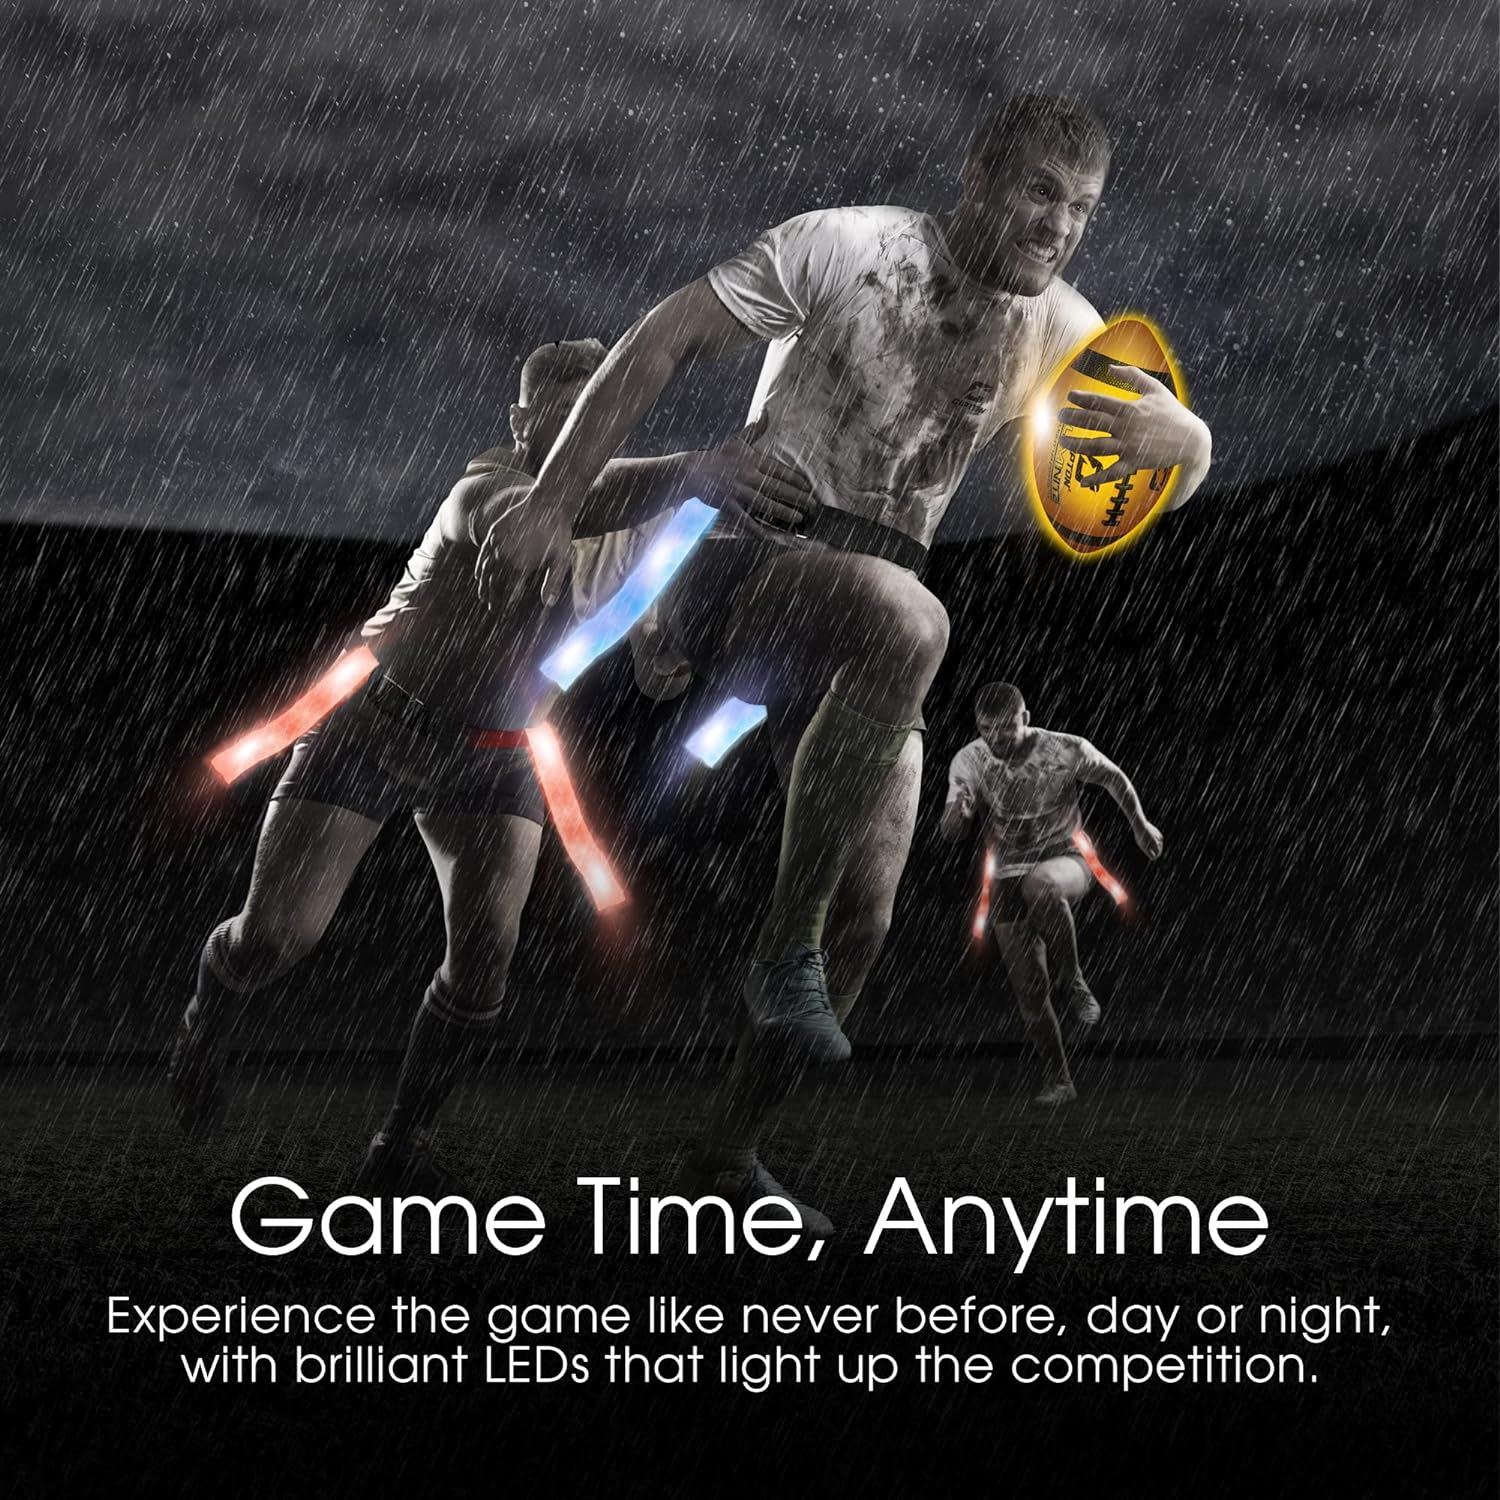 LED Premium Rubber Football (Youth)